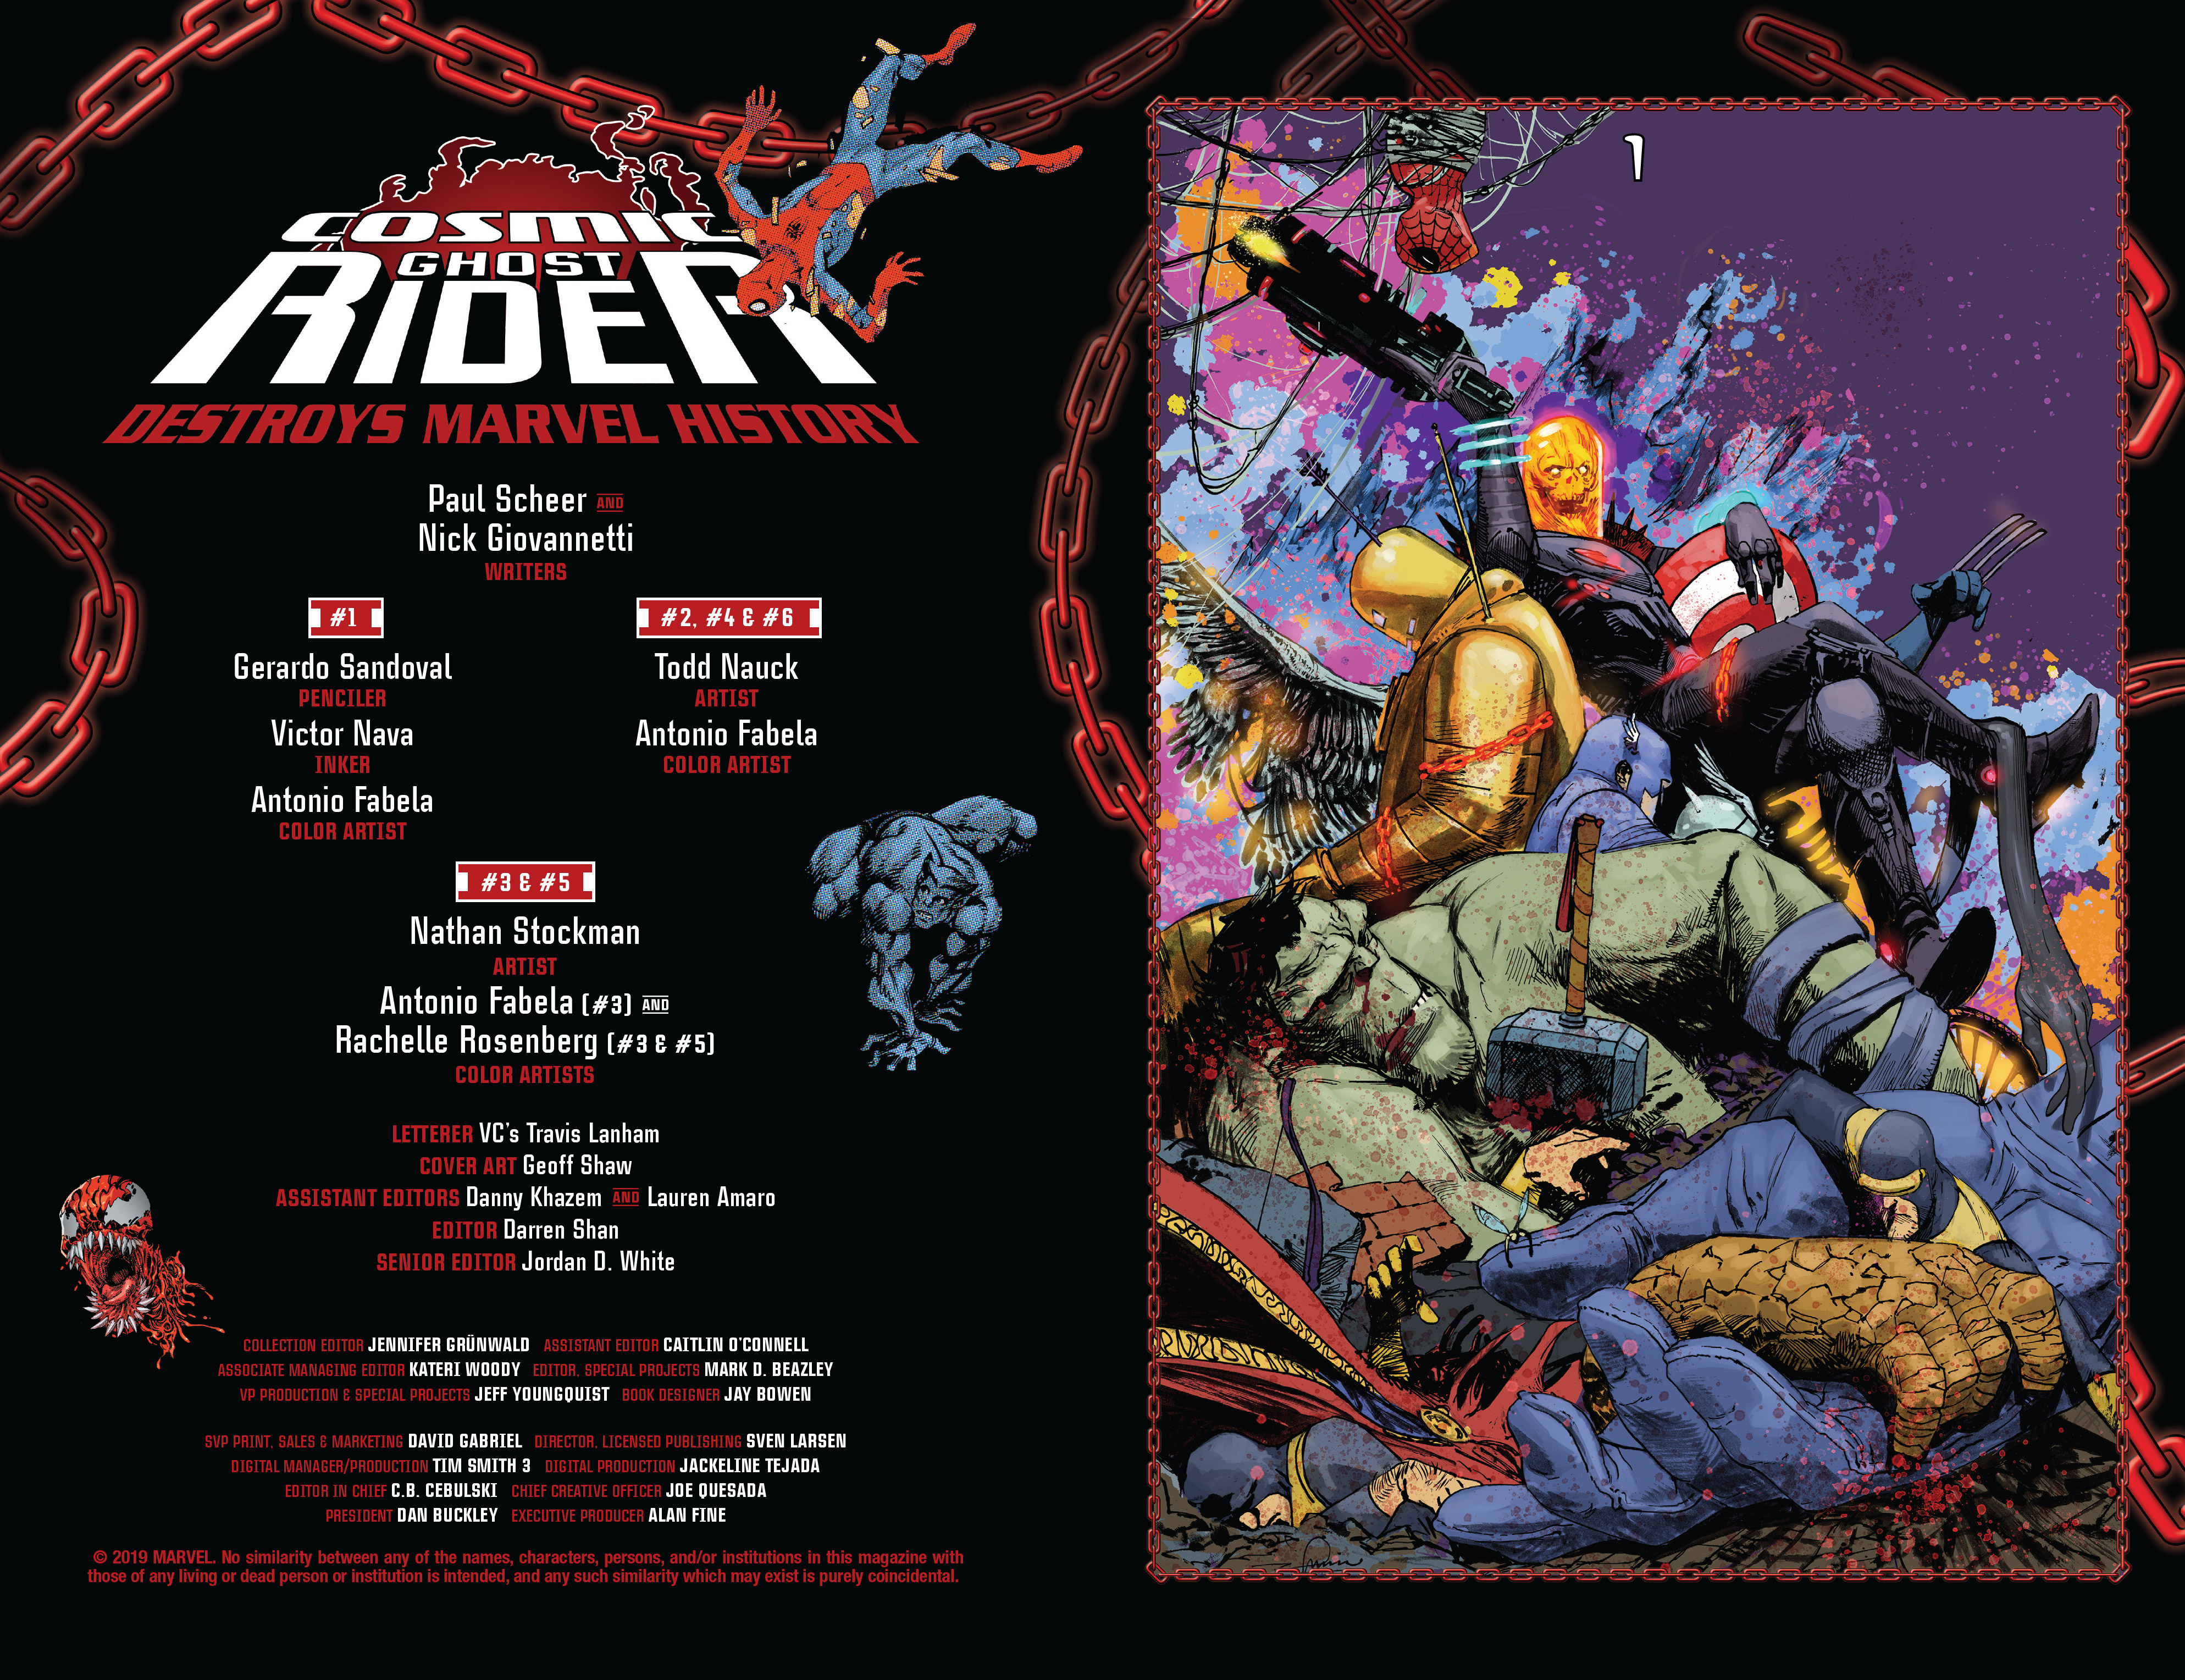 Read online Cosmic Ghost Rider Destroys Marvel History comic -  Issue # _TPB - 3